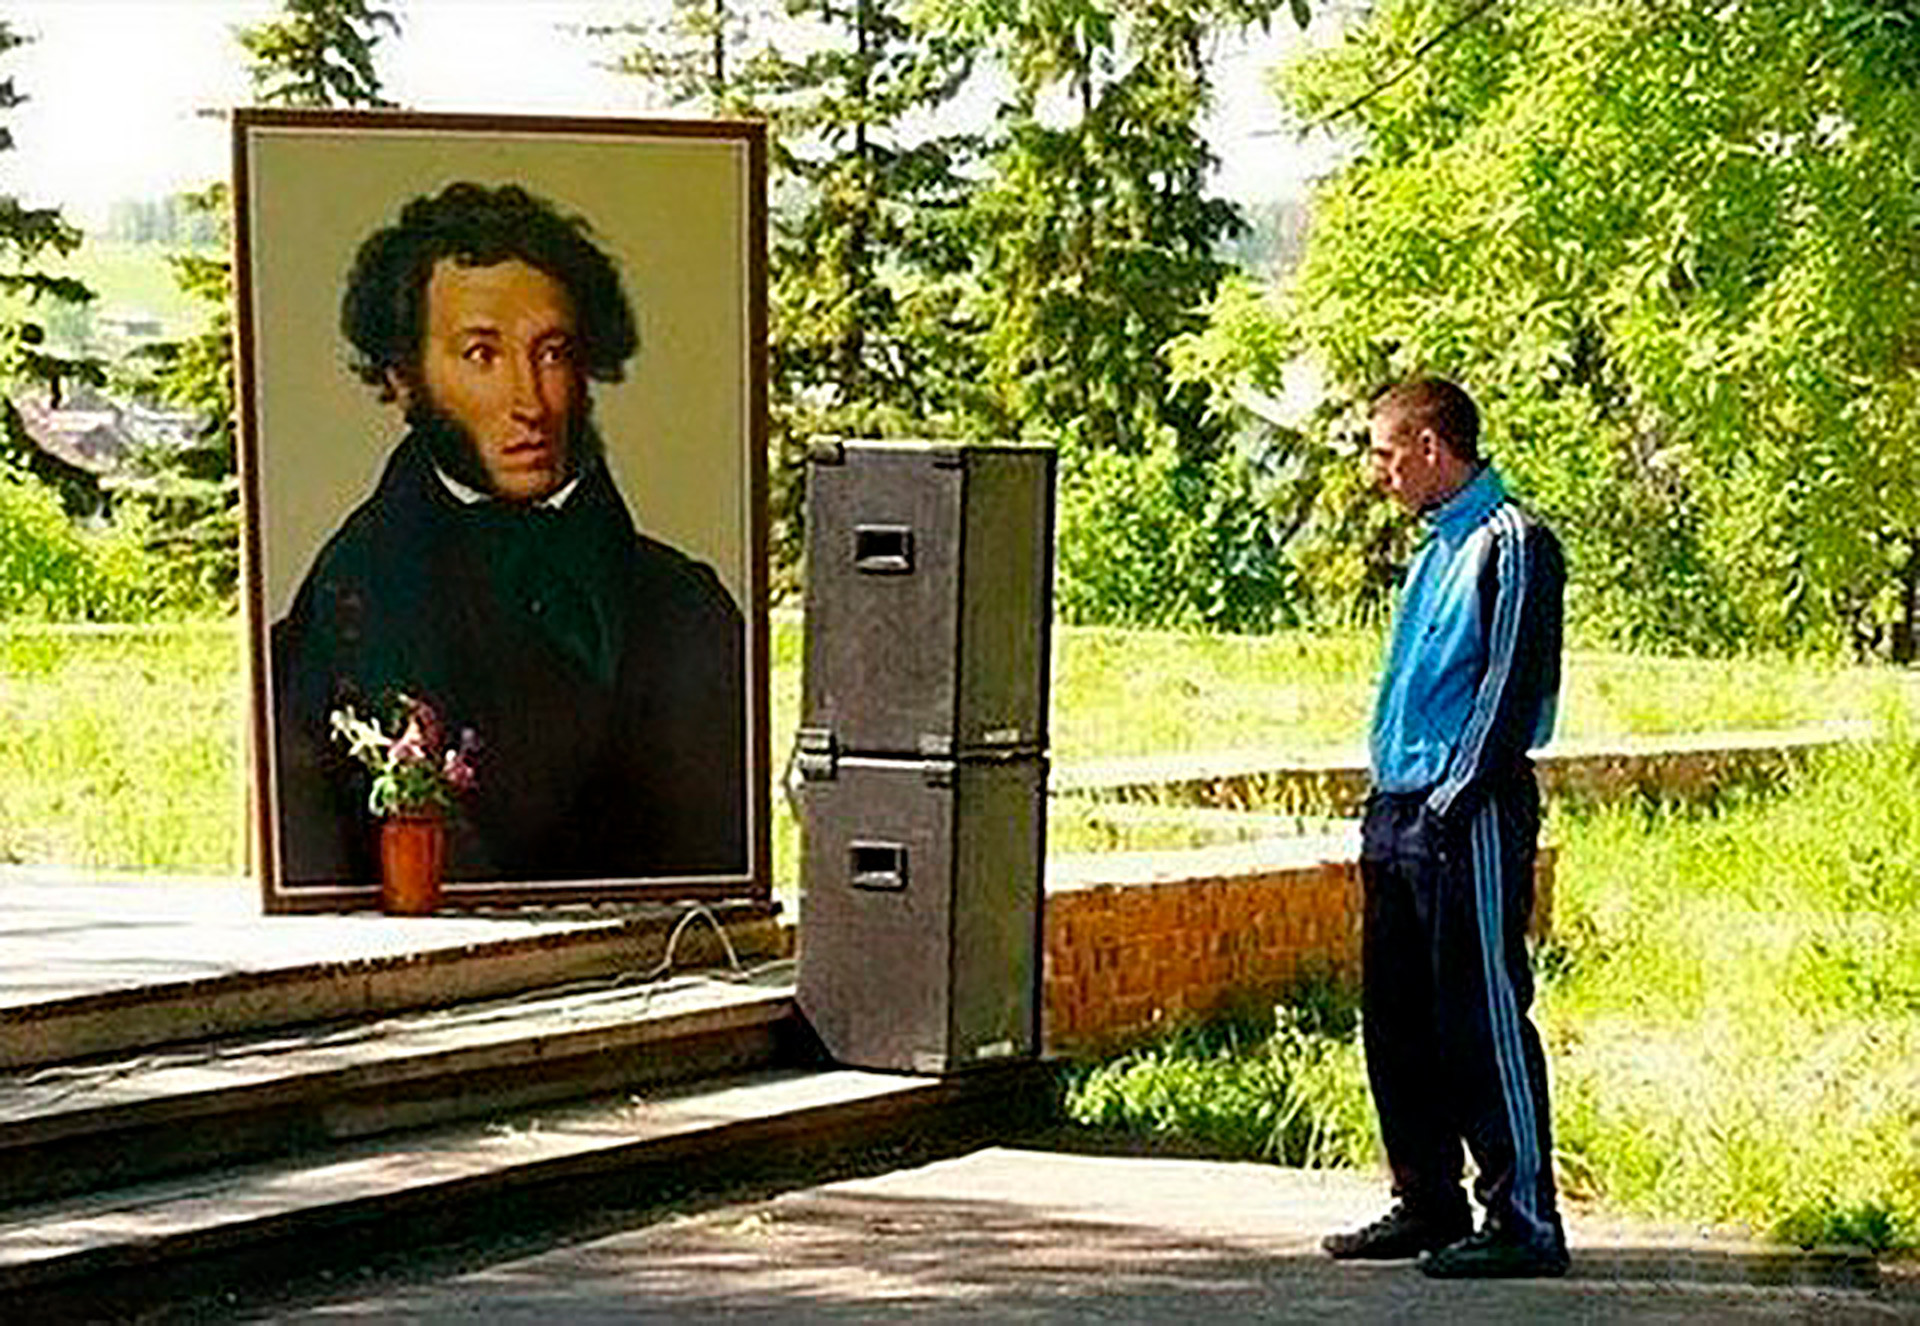 The ancestor (Alexander Pushkin, the most famous Russian poet) and the descendant (some gopnik).